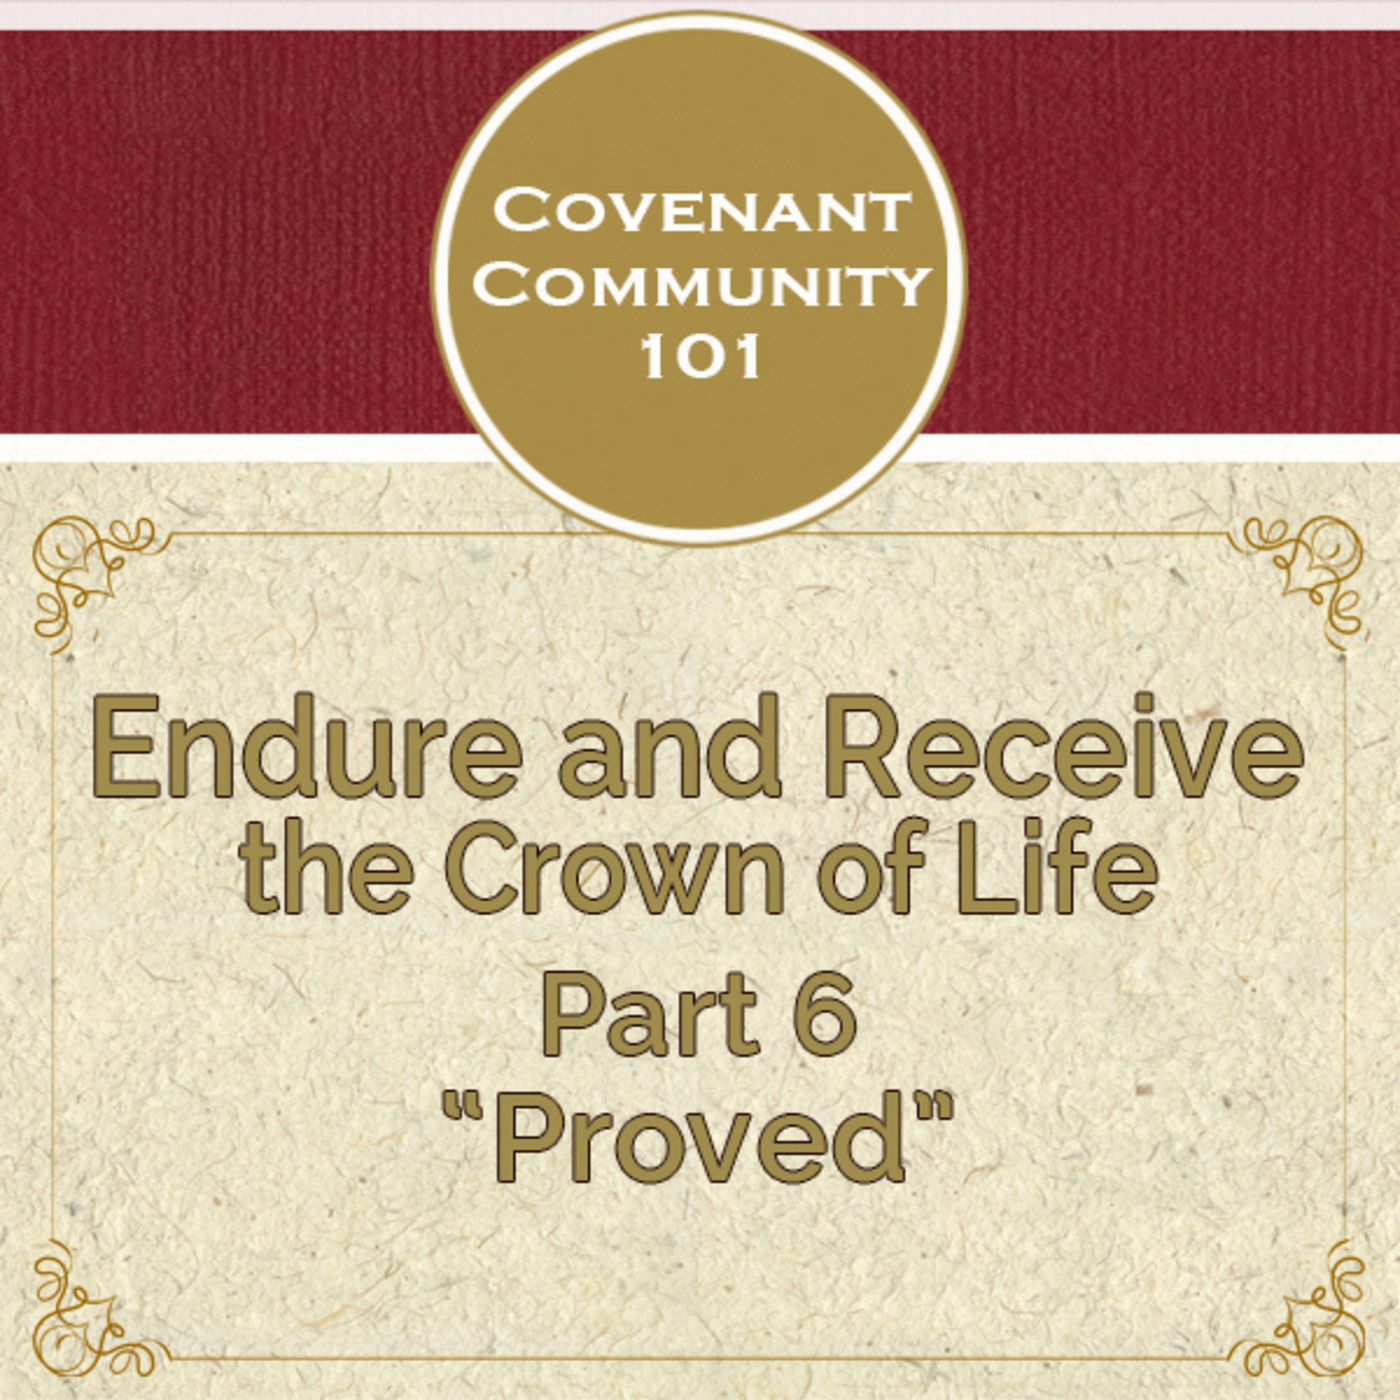 Covenant Community 101: Endure and Receive the Crown of Life - Part 6 “Proved”